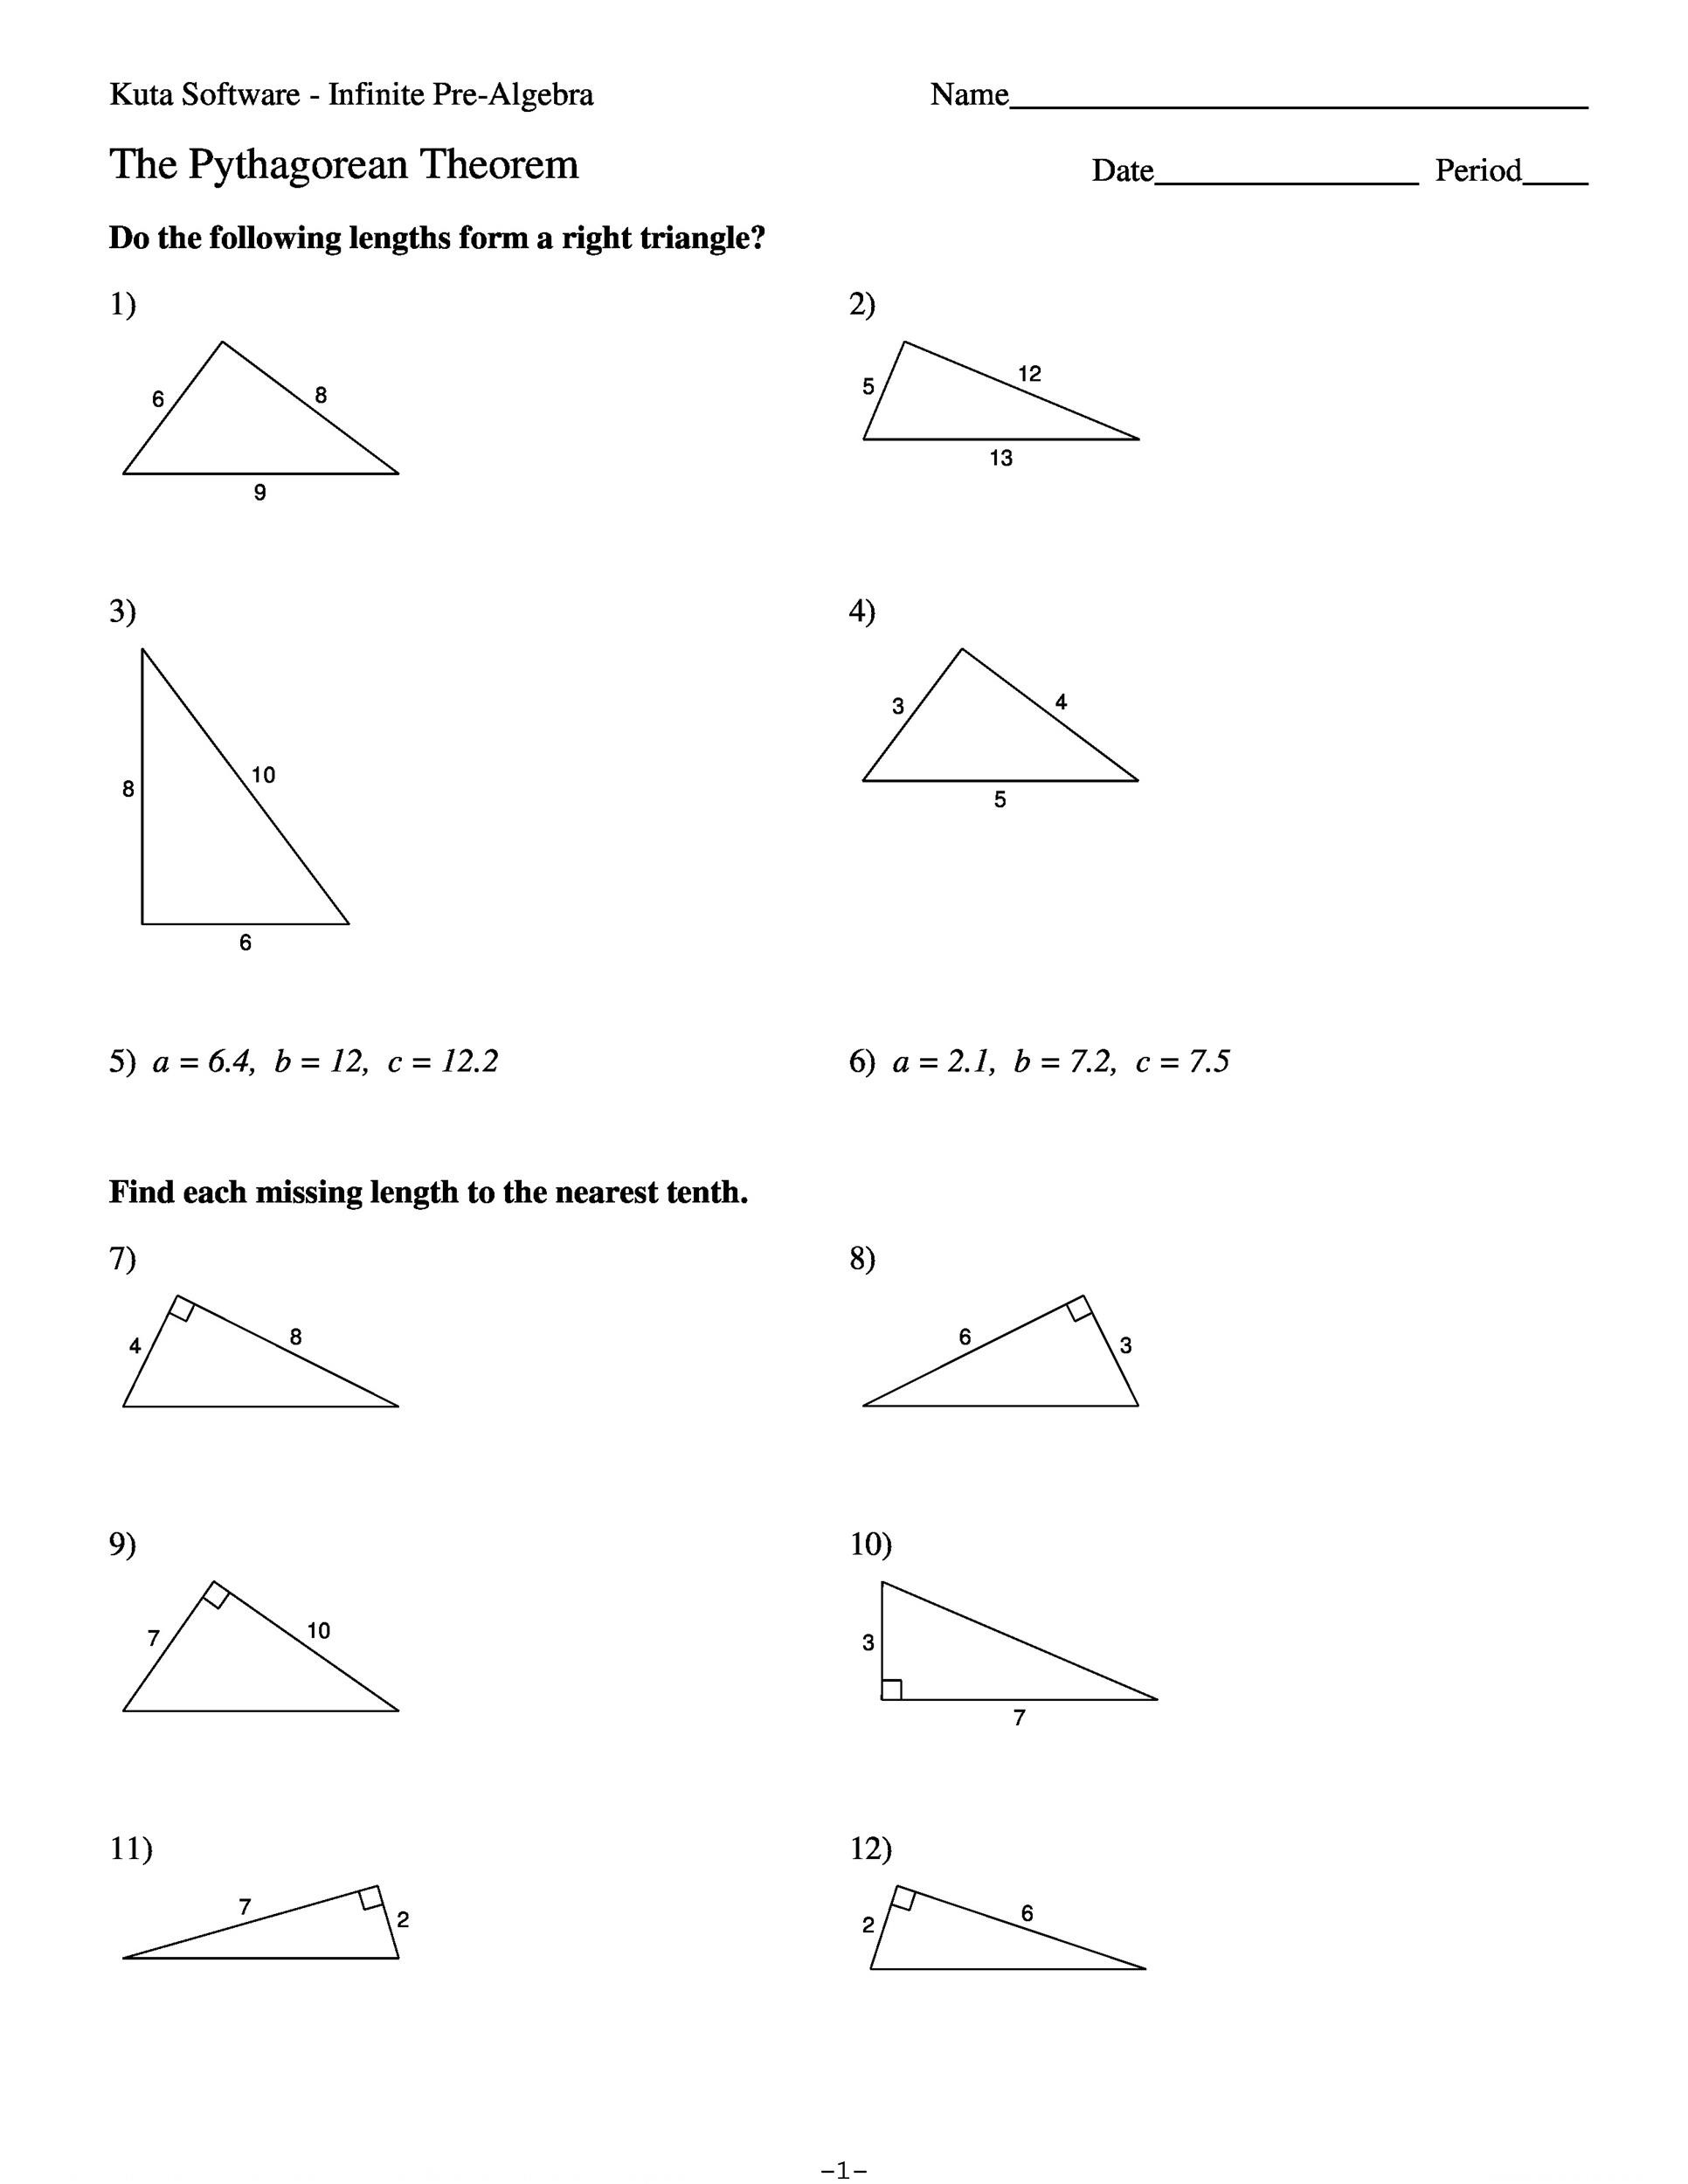 Finding Missing Angles Worksheet 48 Pythagorean theorem Worksheet with Answers [word Pdf]